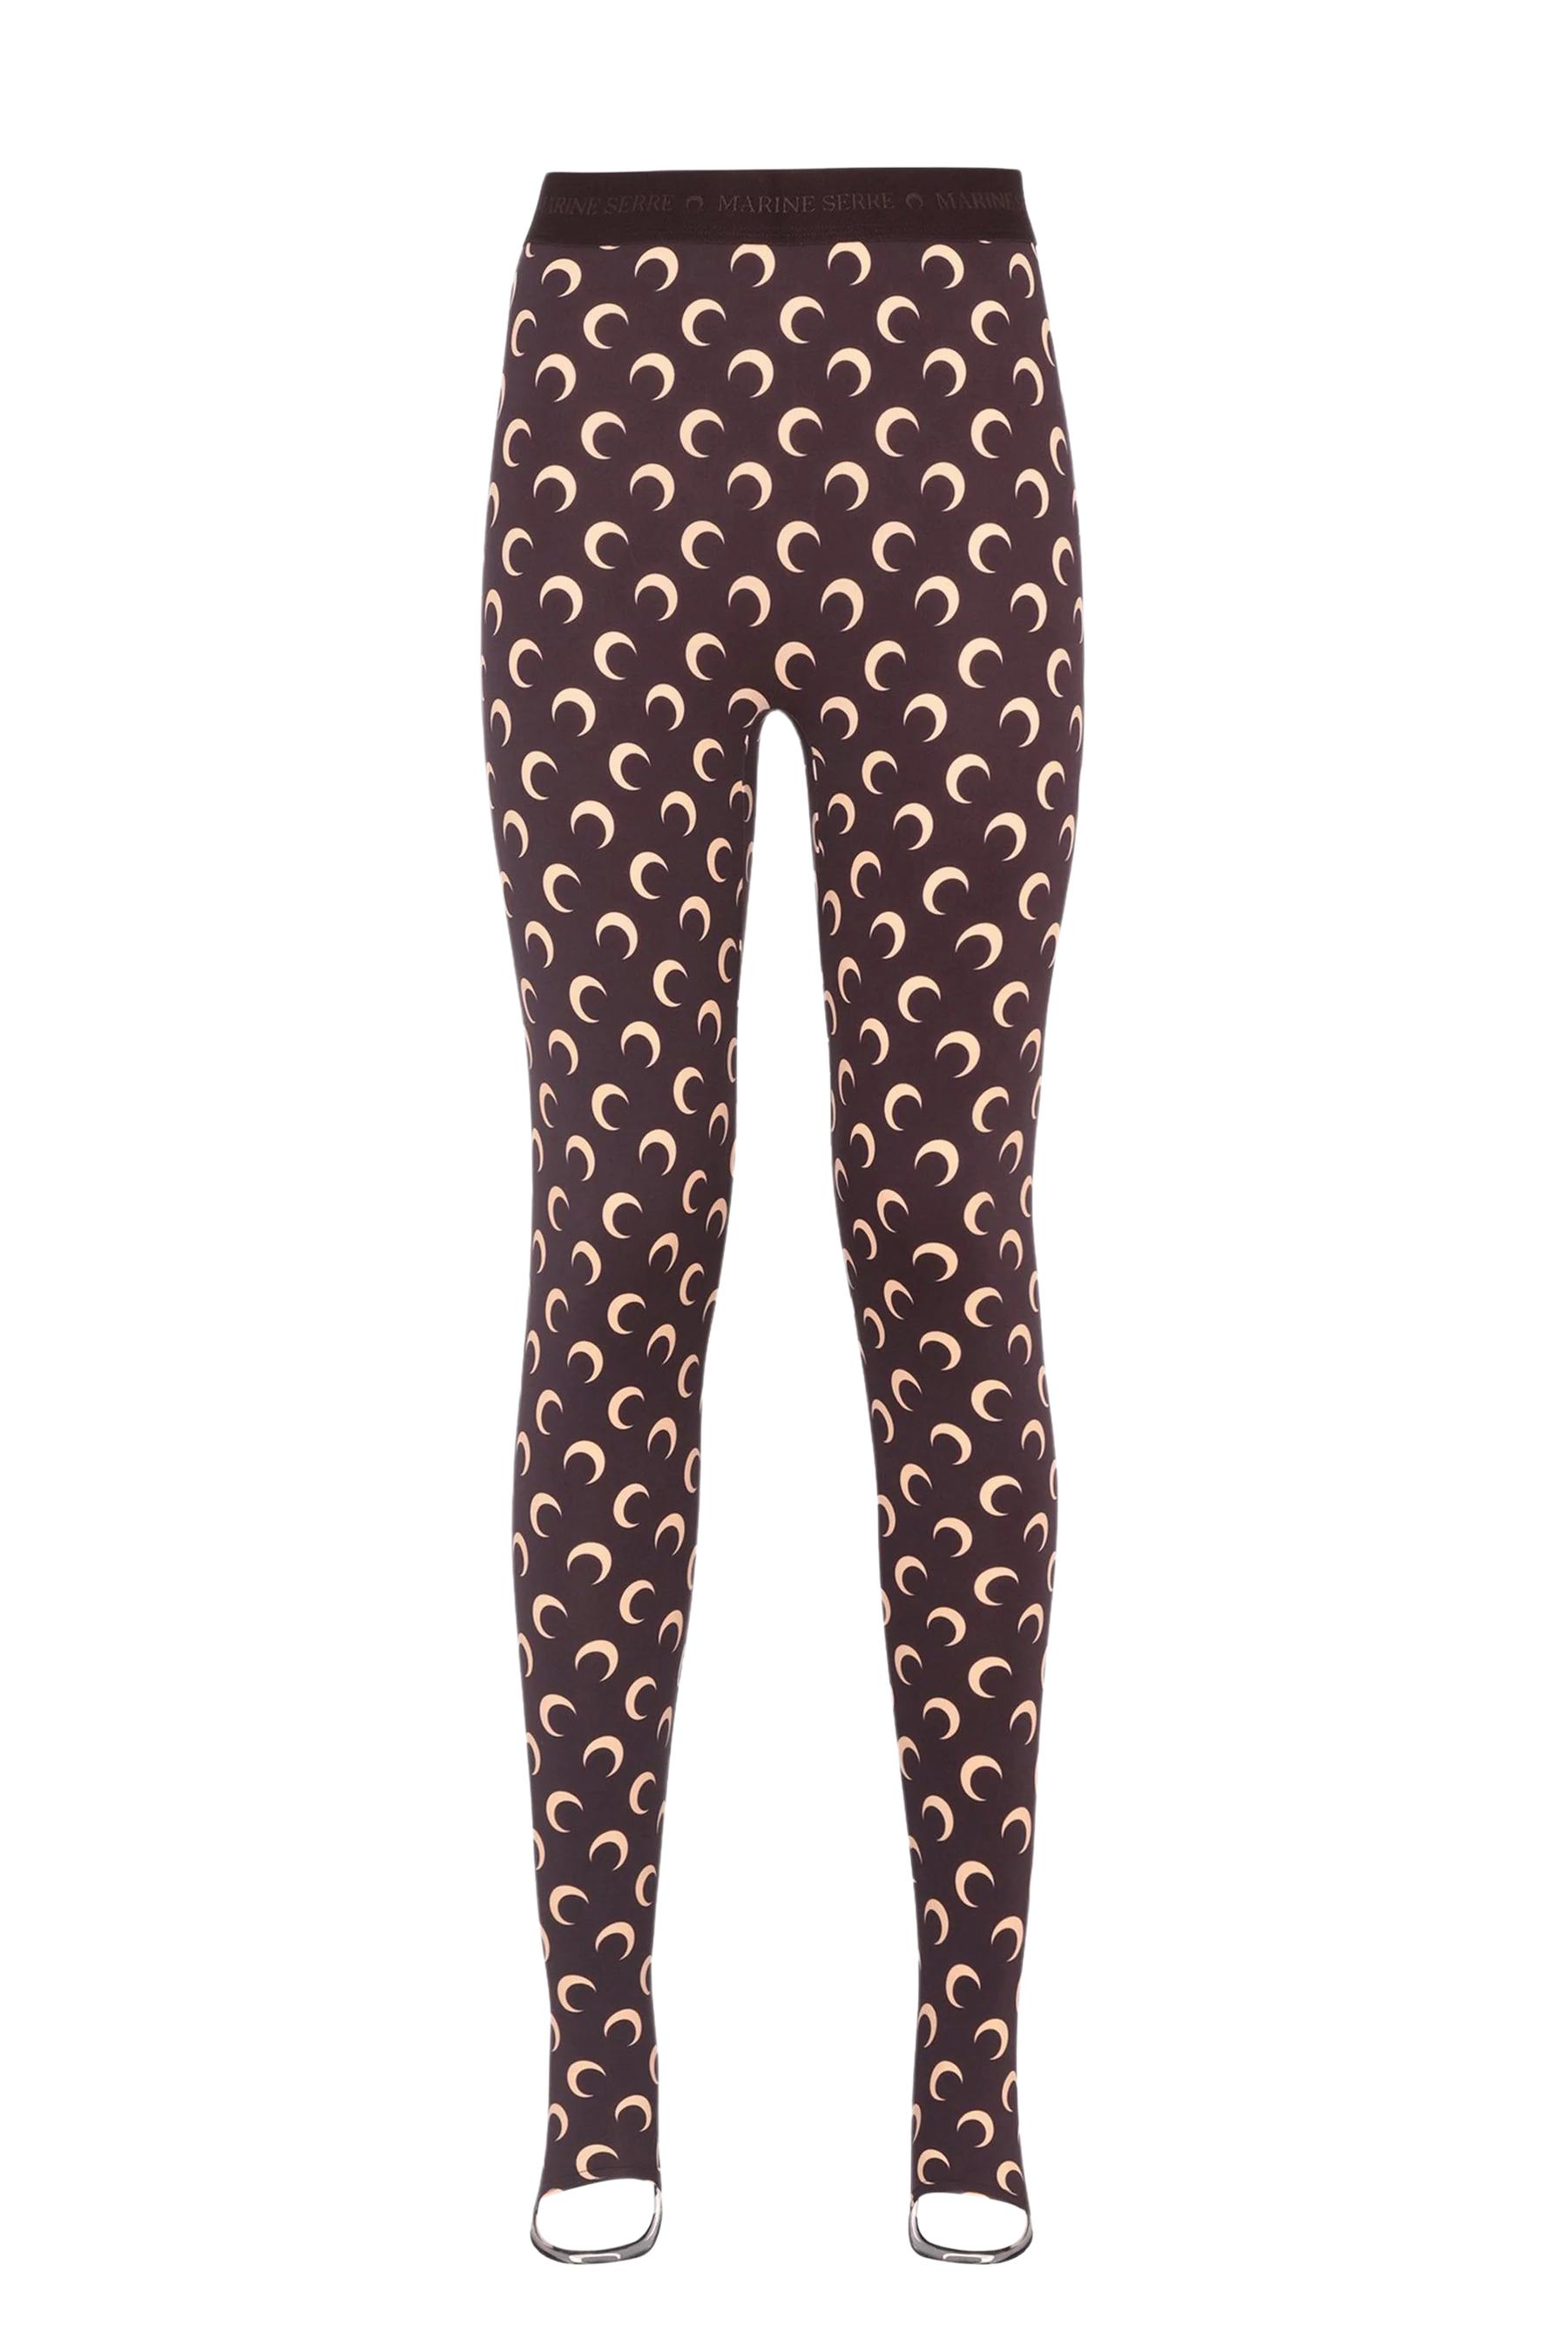 Marine Serre All Over Moon Leggings in Natural | Lyst